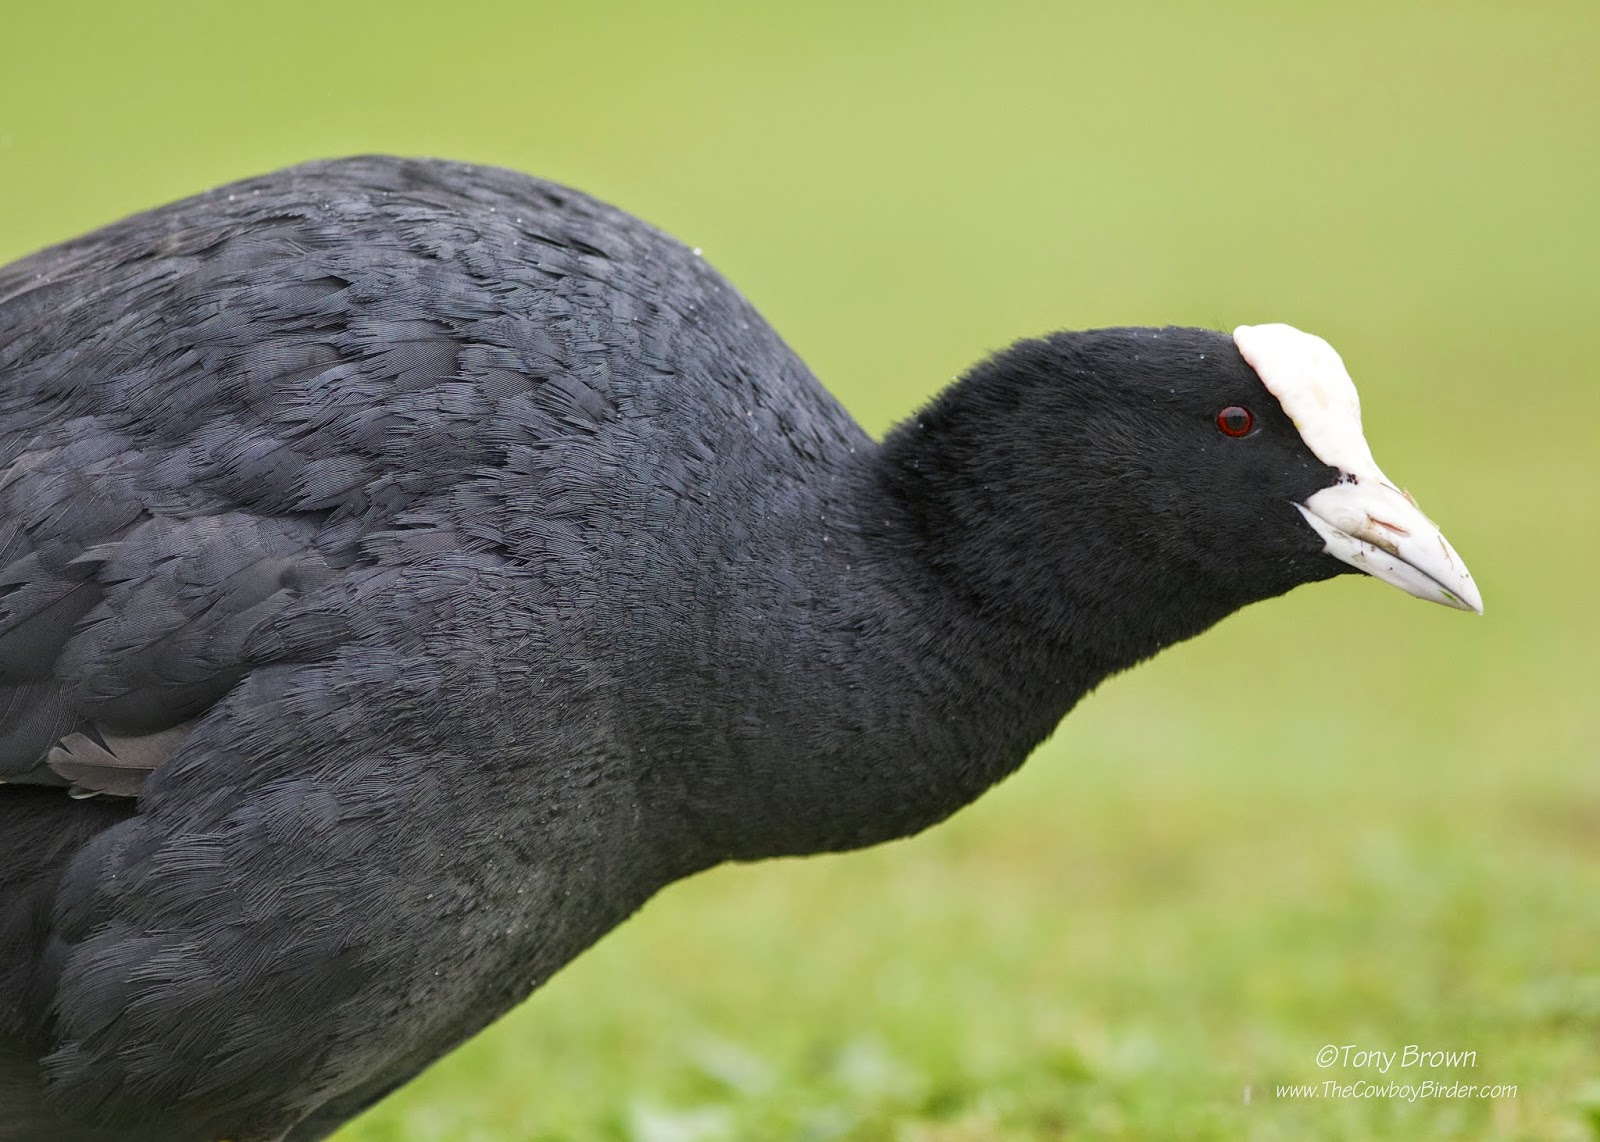 Coot, not American Coot